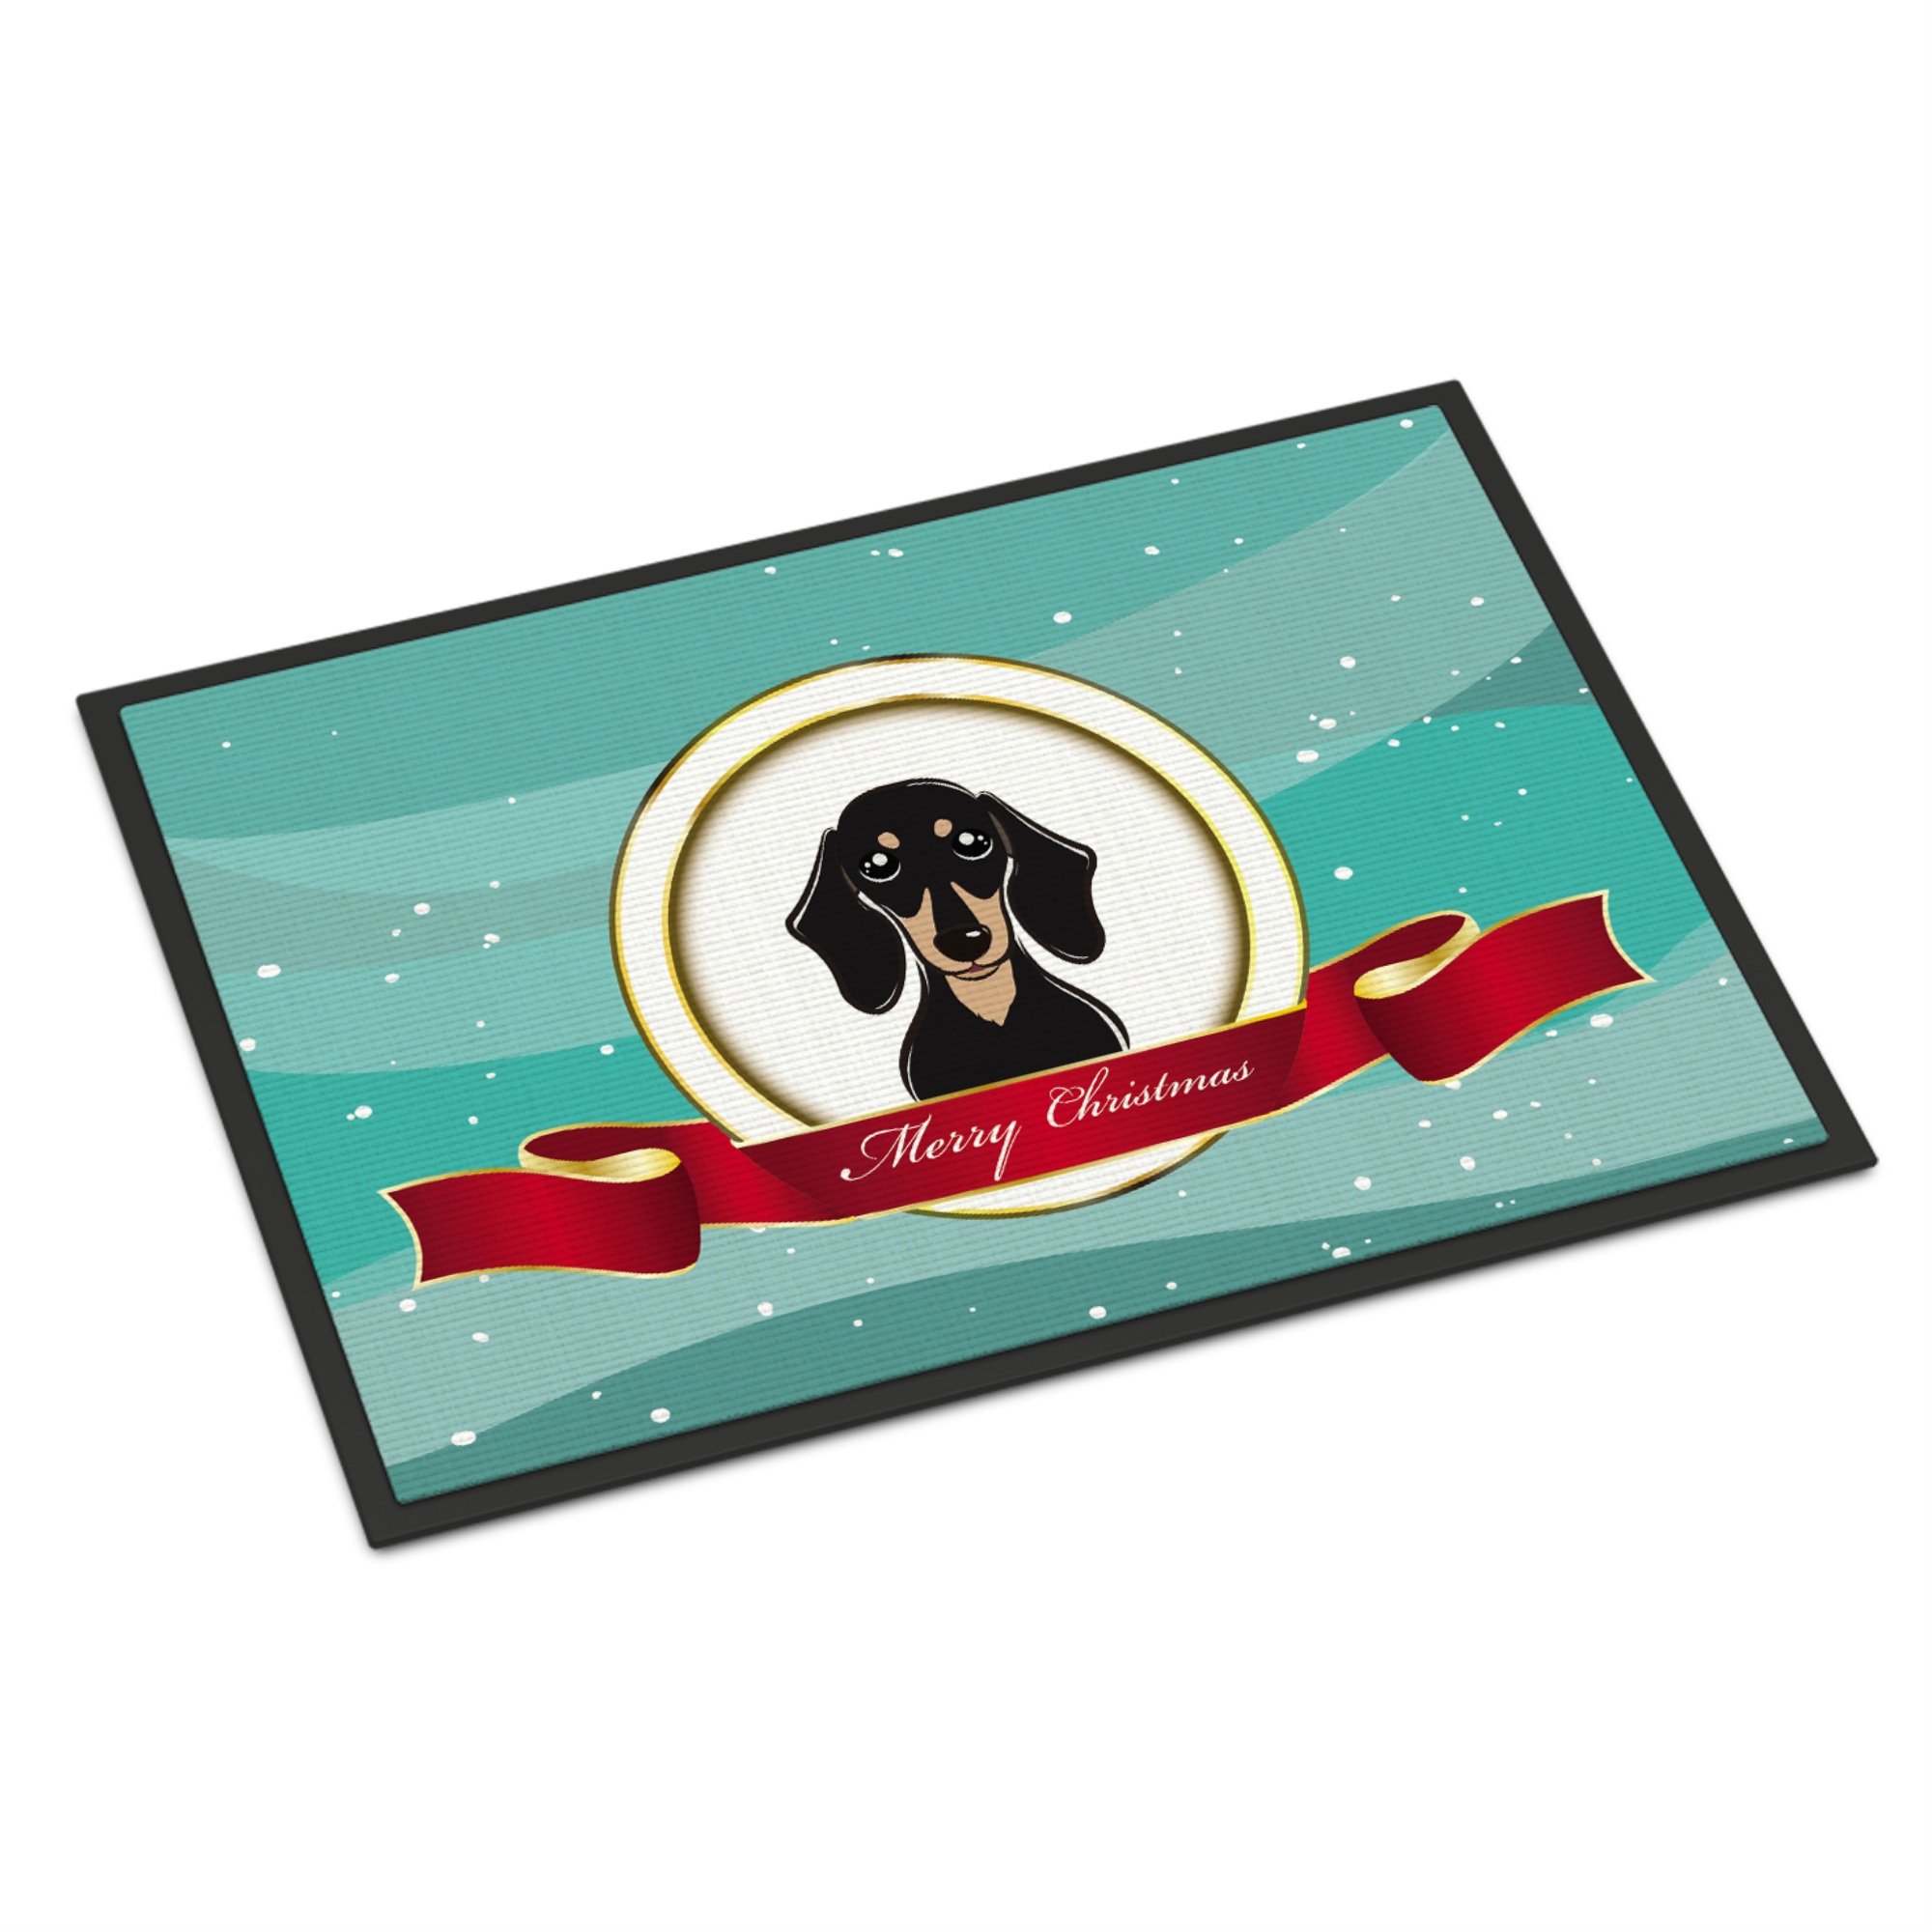 Caroline's Treasures BB1525JMAT Smooth Black and Tan Dachshund Merry Christmas Indoor or Outdoor Mat, 24"" x 36"", Multicolor"